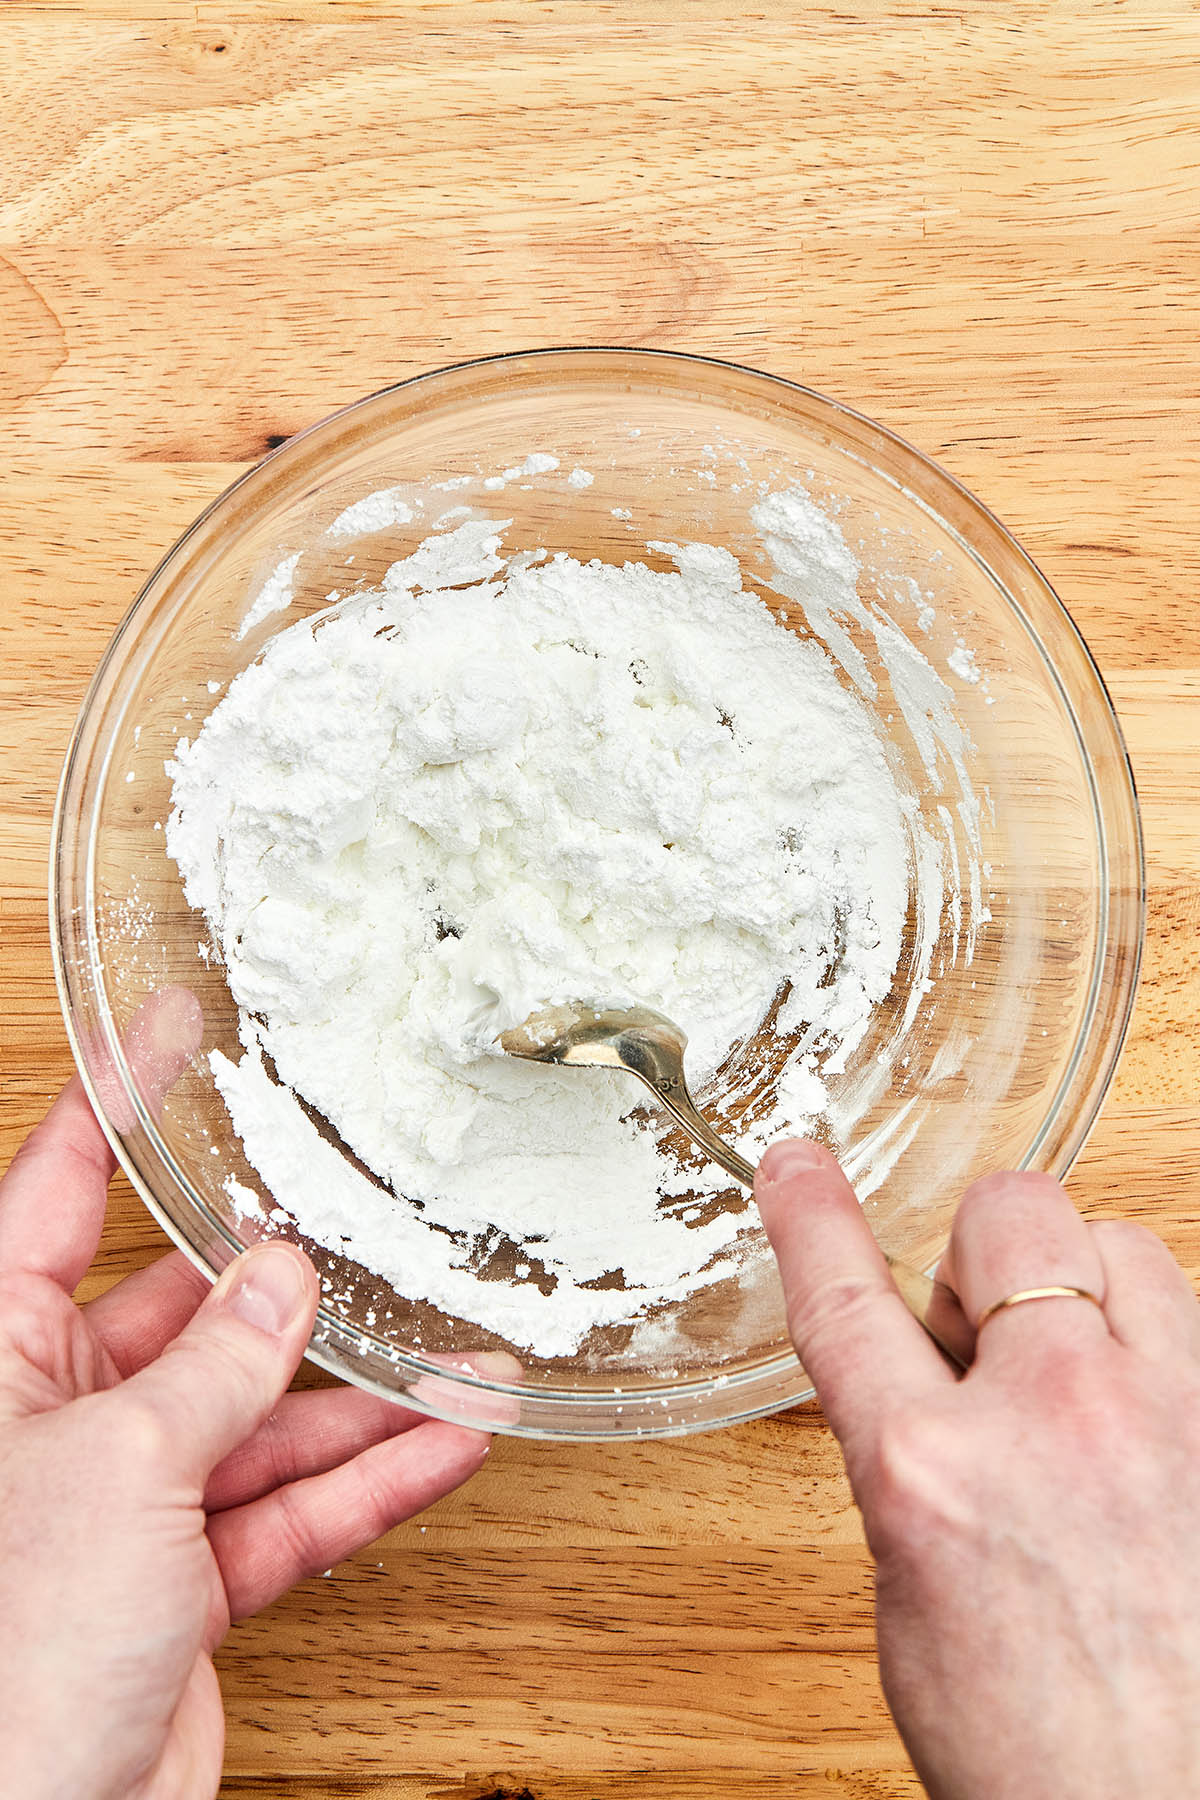 A hand mixing icing with a spoon.